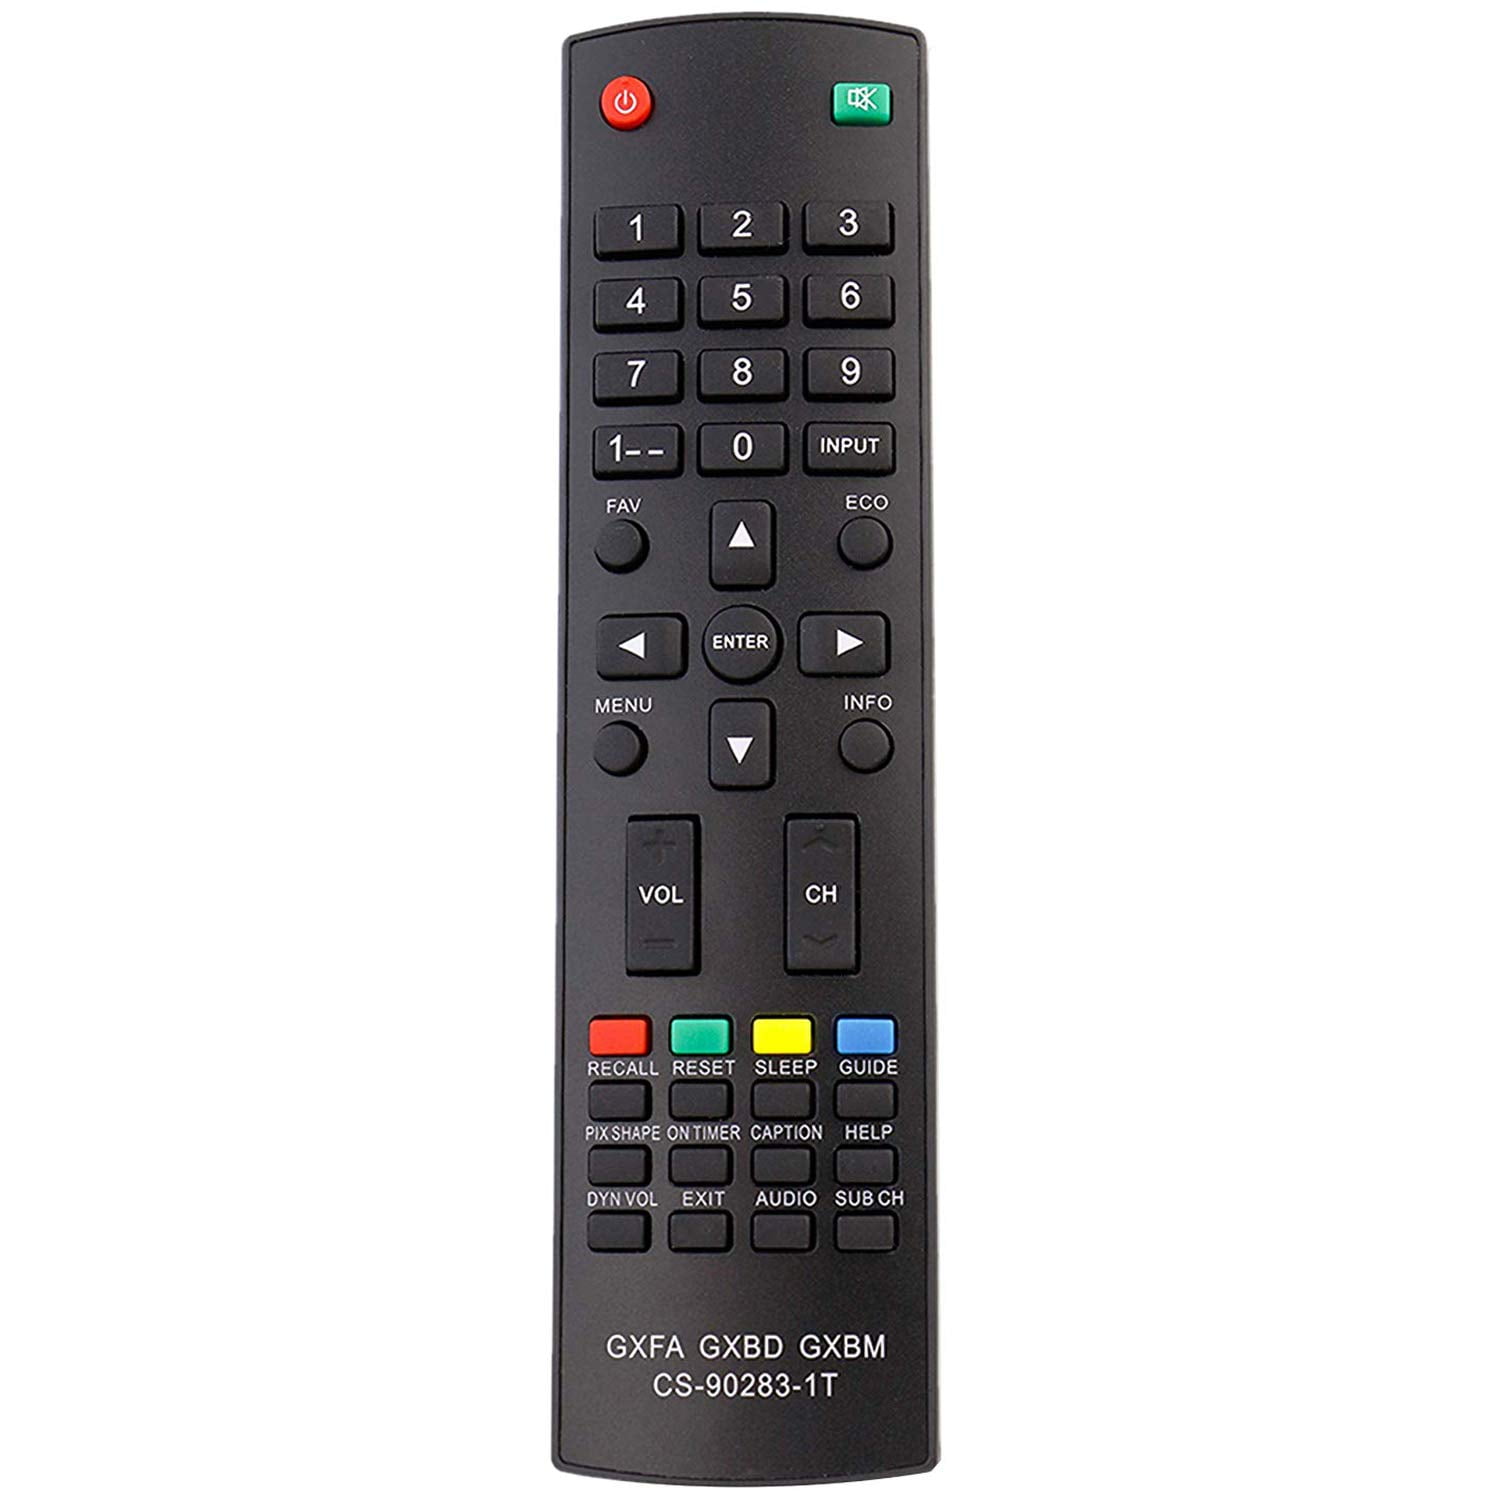 New GXFA GXBD GXBM CS-90283-1T Remote Control fit for Sanyo Smart LCD